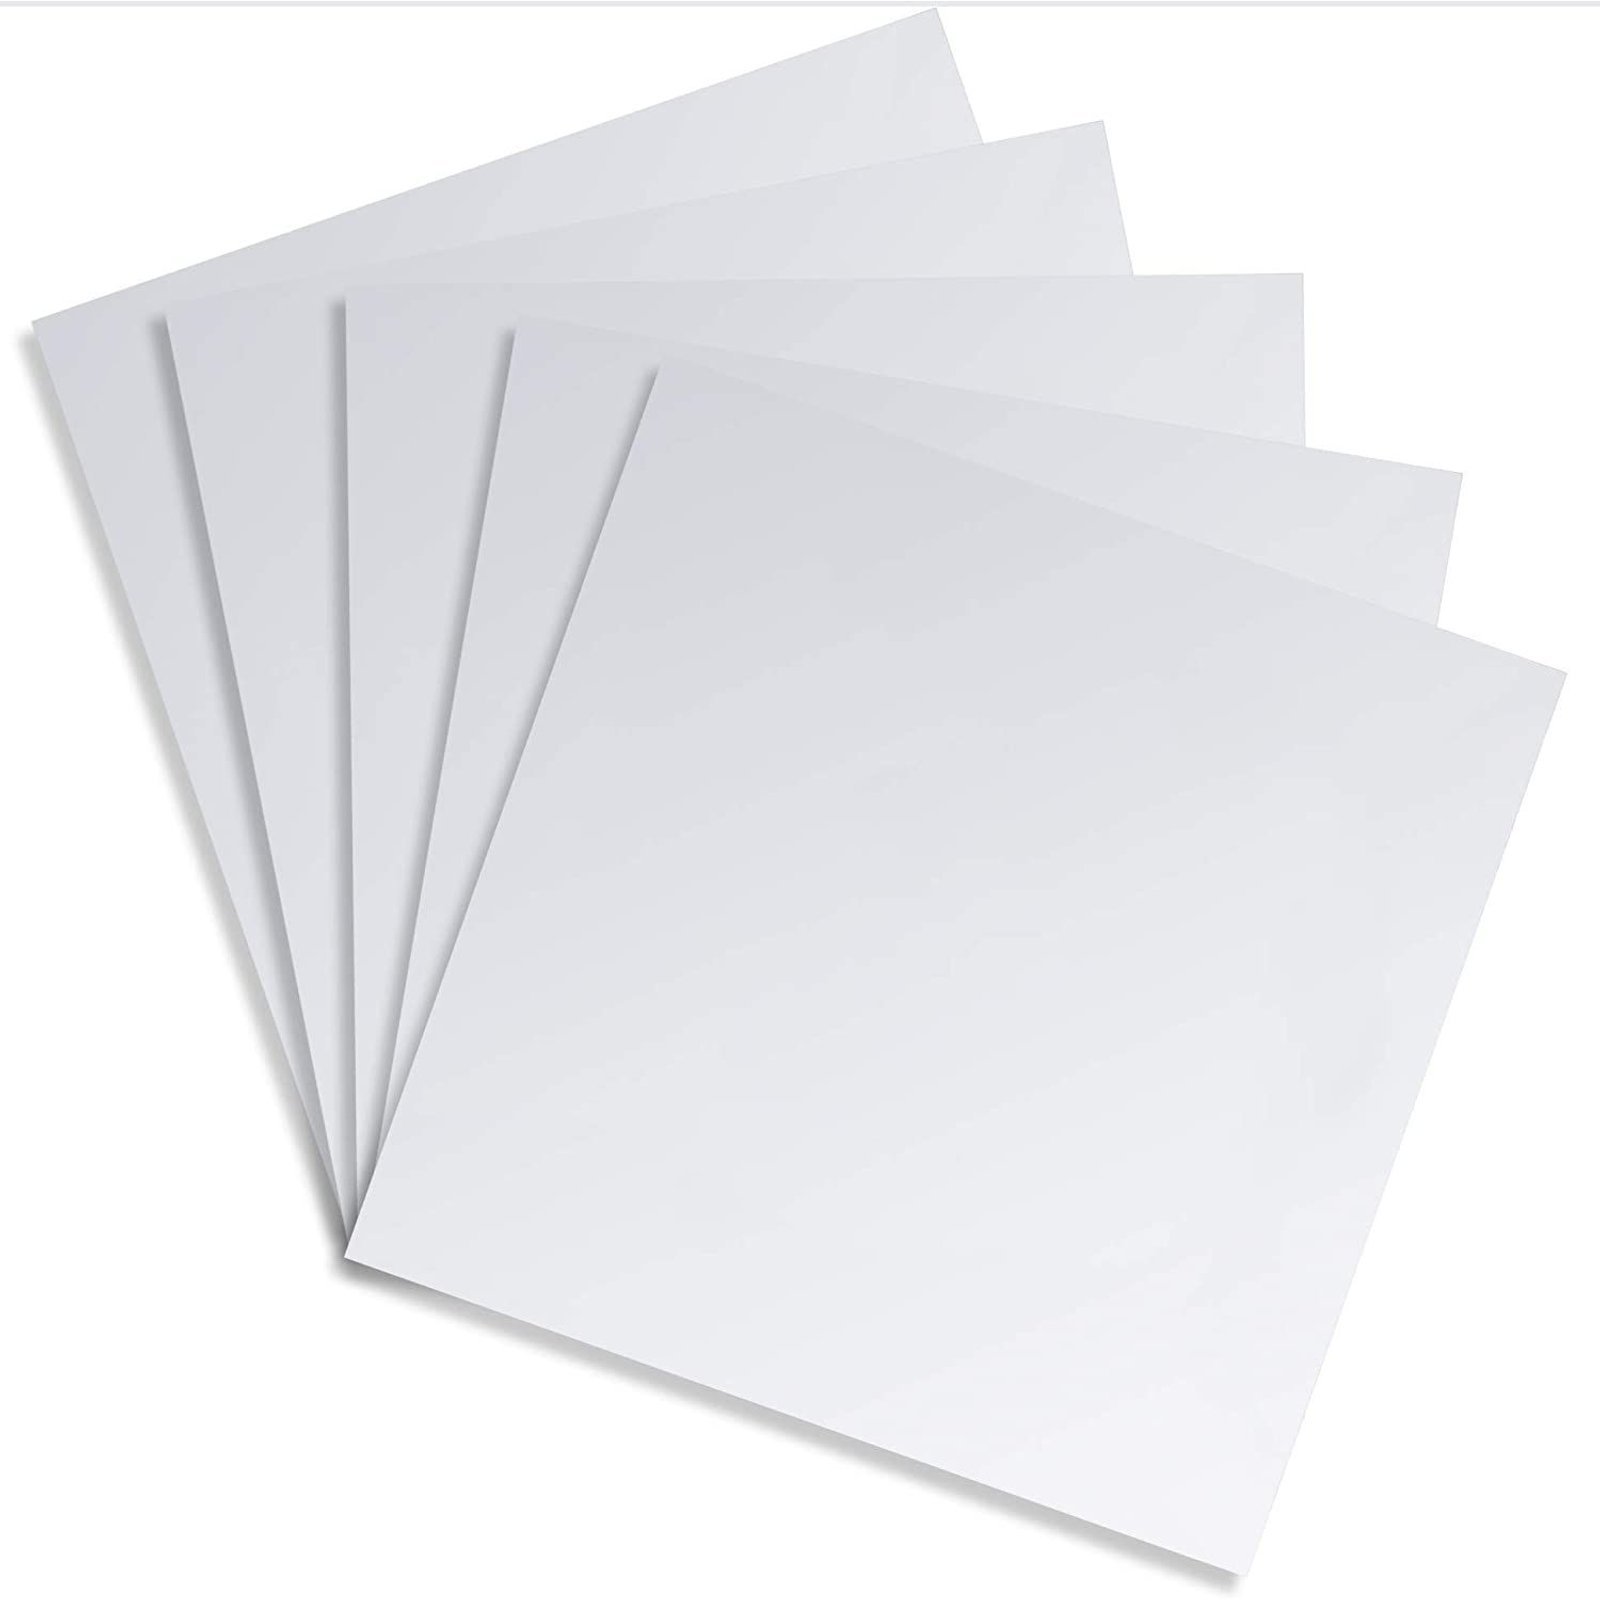 Juvale Square Adhesive Mirror Sheet Tiles for Wall Decor (5 Count), 12 Inches